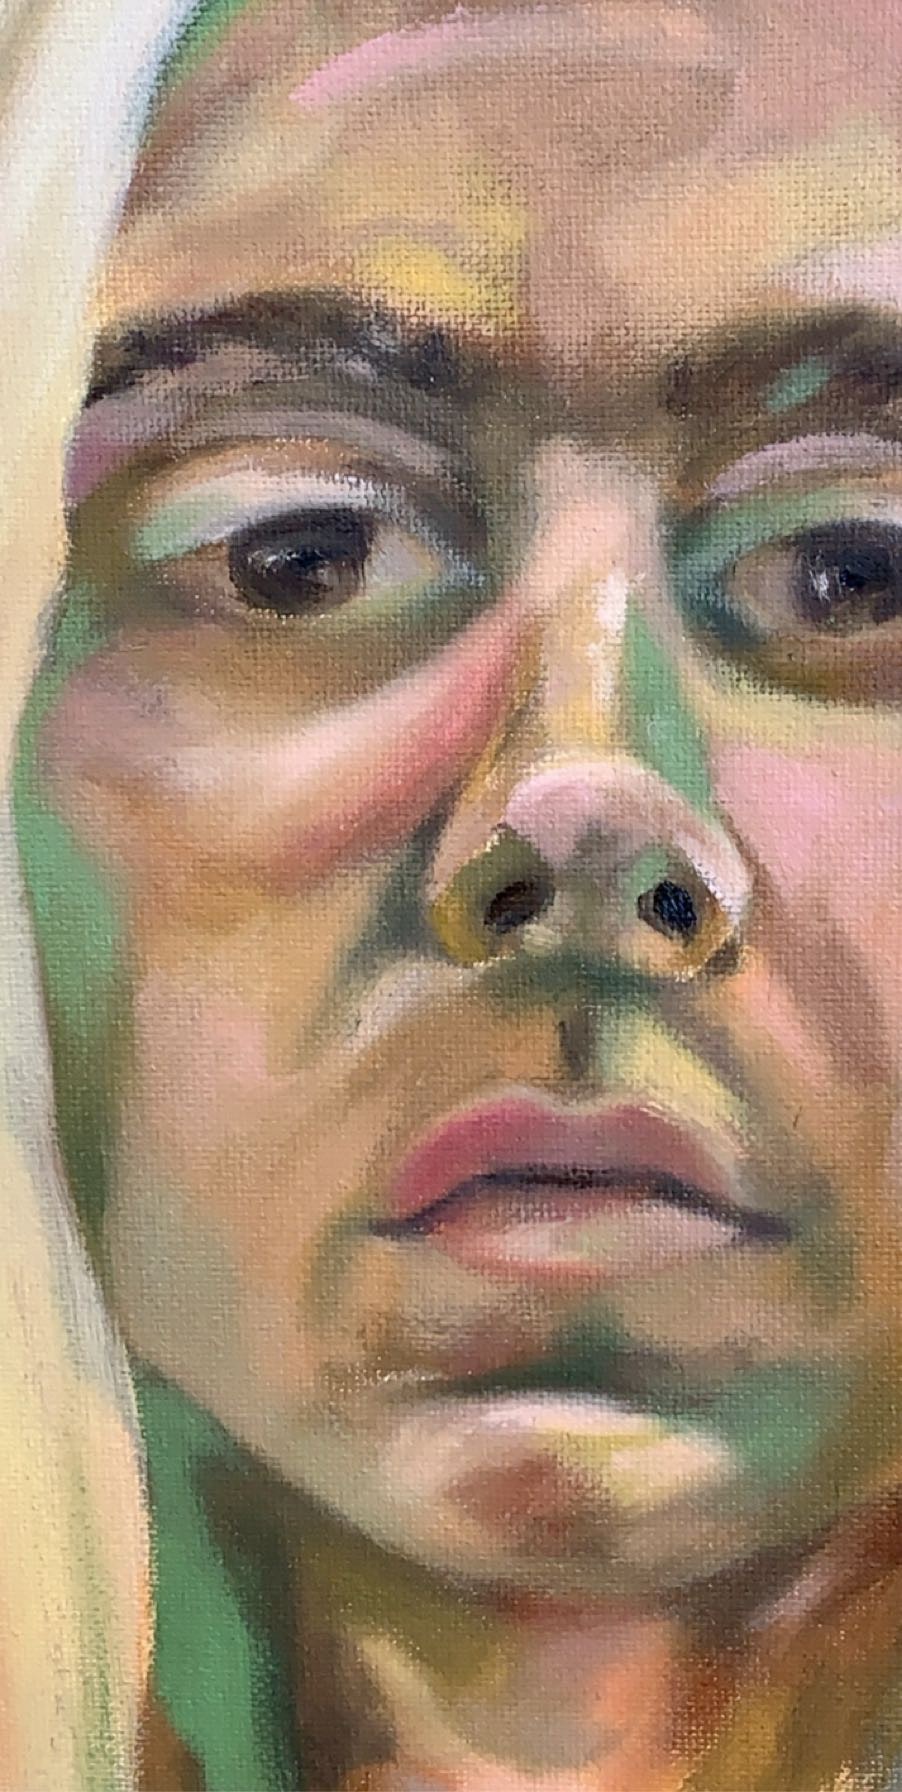 This is a self portrait made with oil paints on canvas using color blocking method.